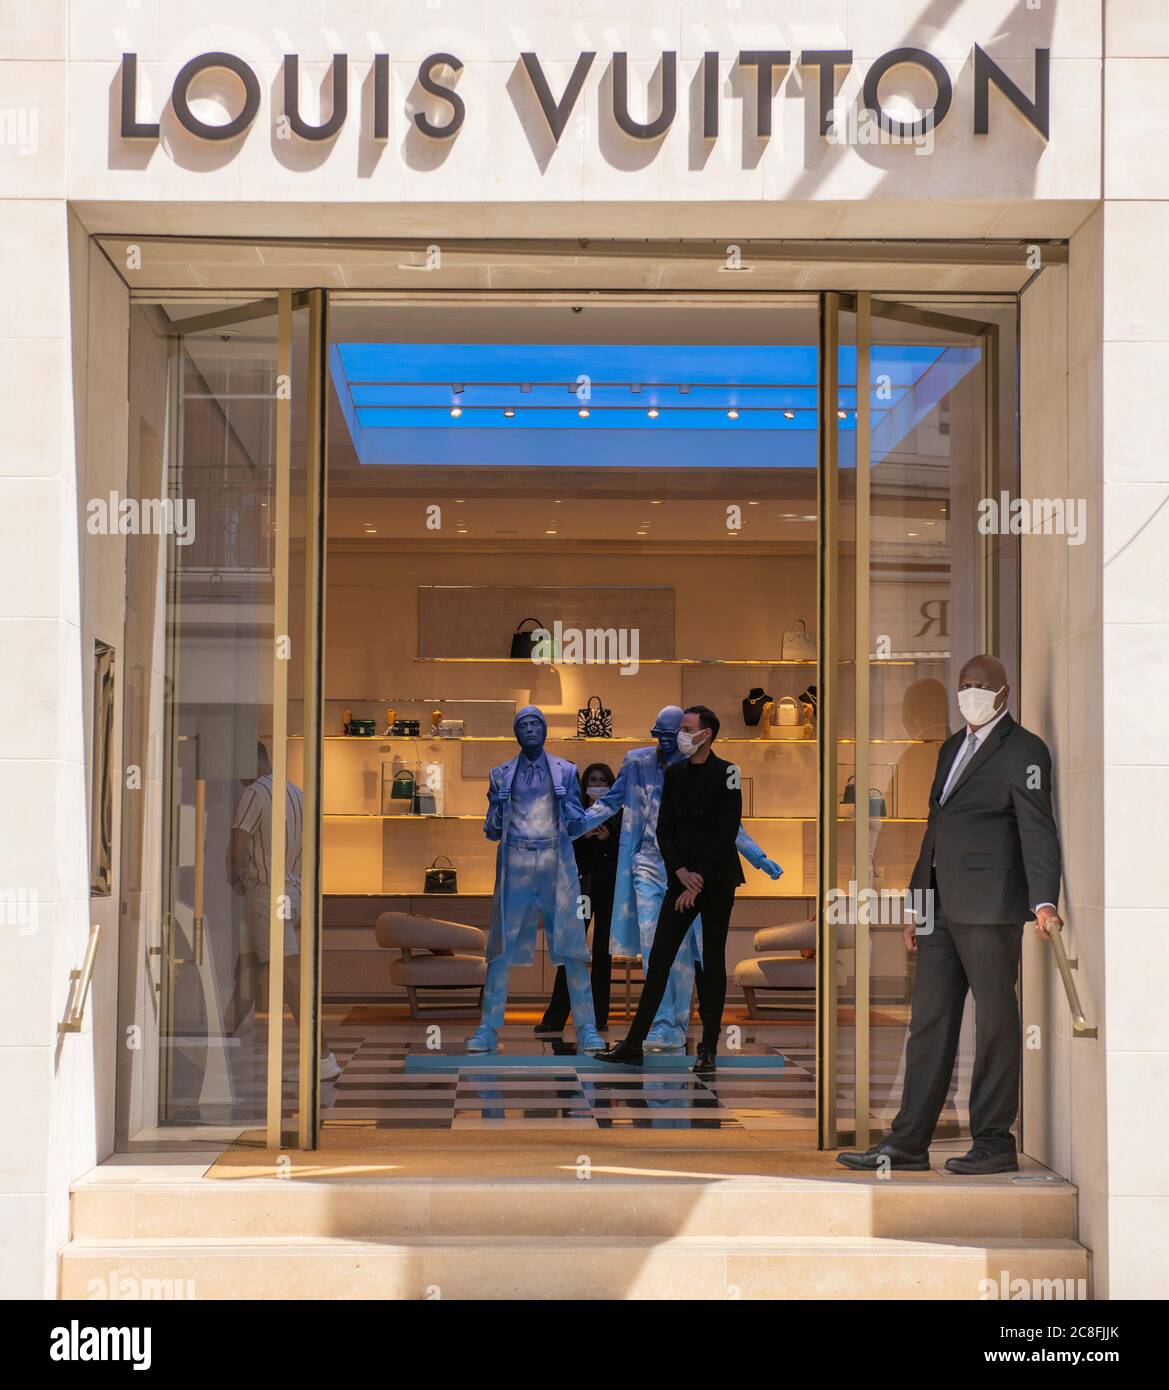 Basel - Switzerland - 7 February 2020 - View Of Louis Vuitton Store  Showroom In The Street, Louis Vuitton Is The Famous French Brand Of Luxury  Handbags Stock Photo, Picture and Royalty Free Image. Image 140052268.